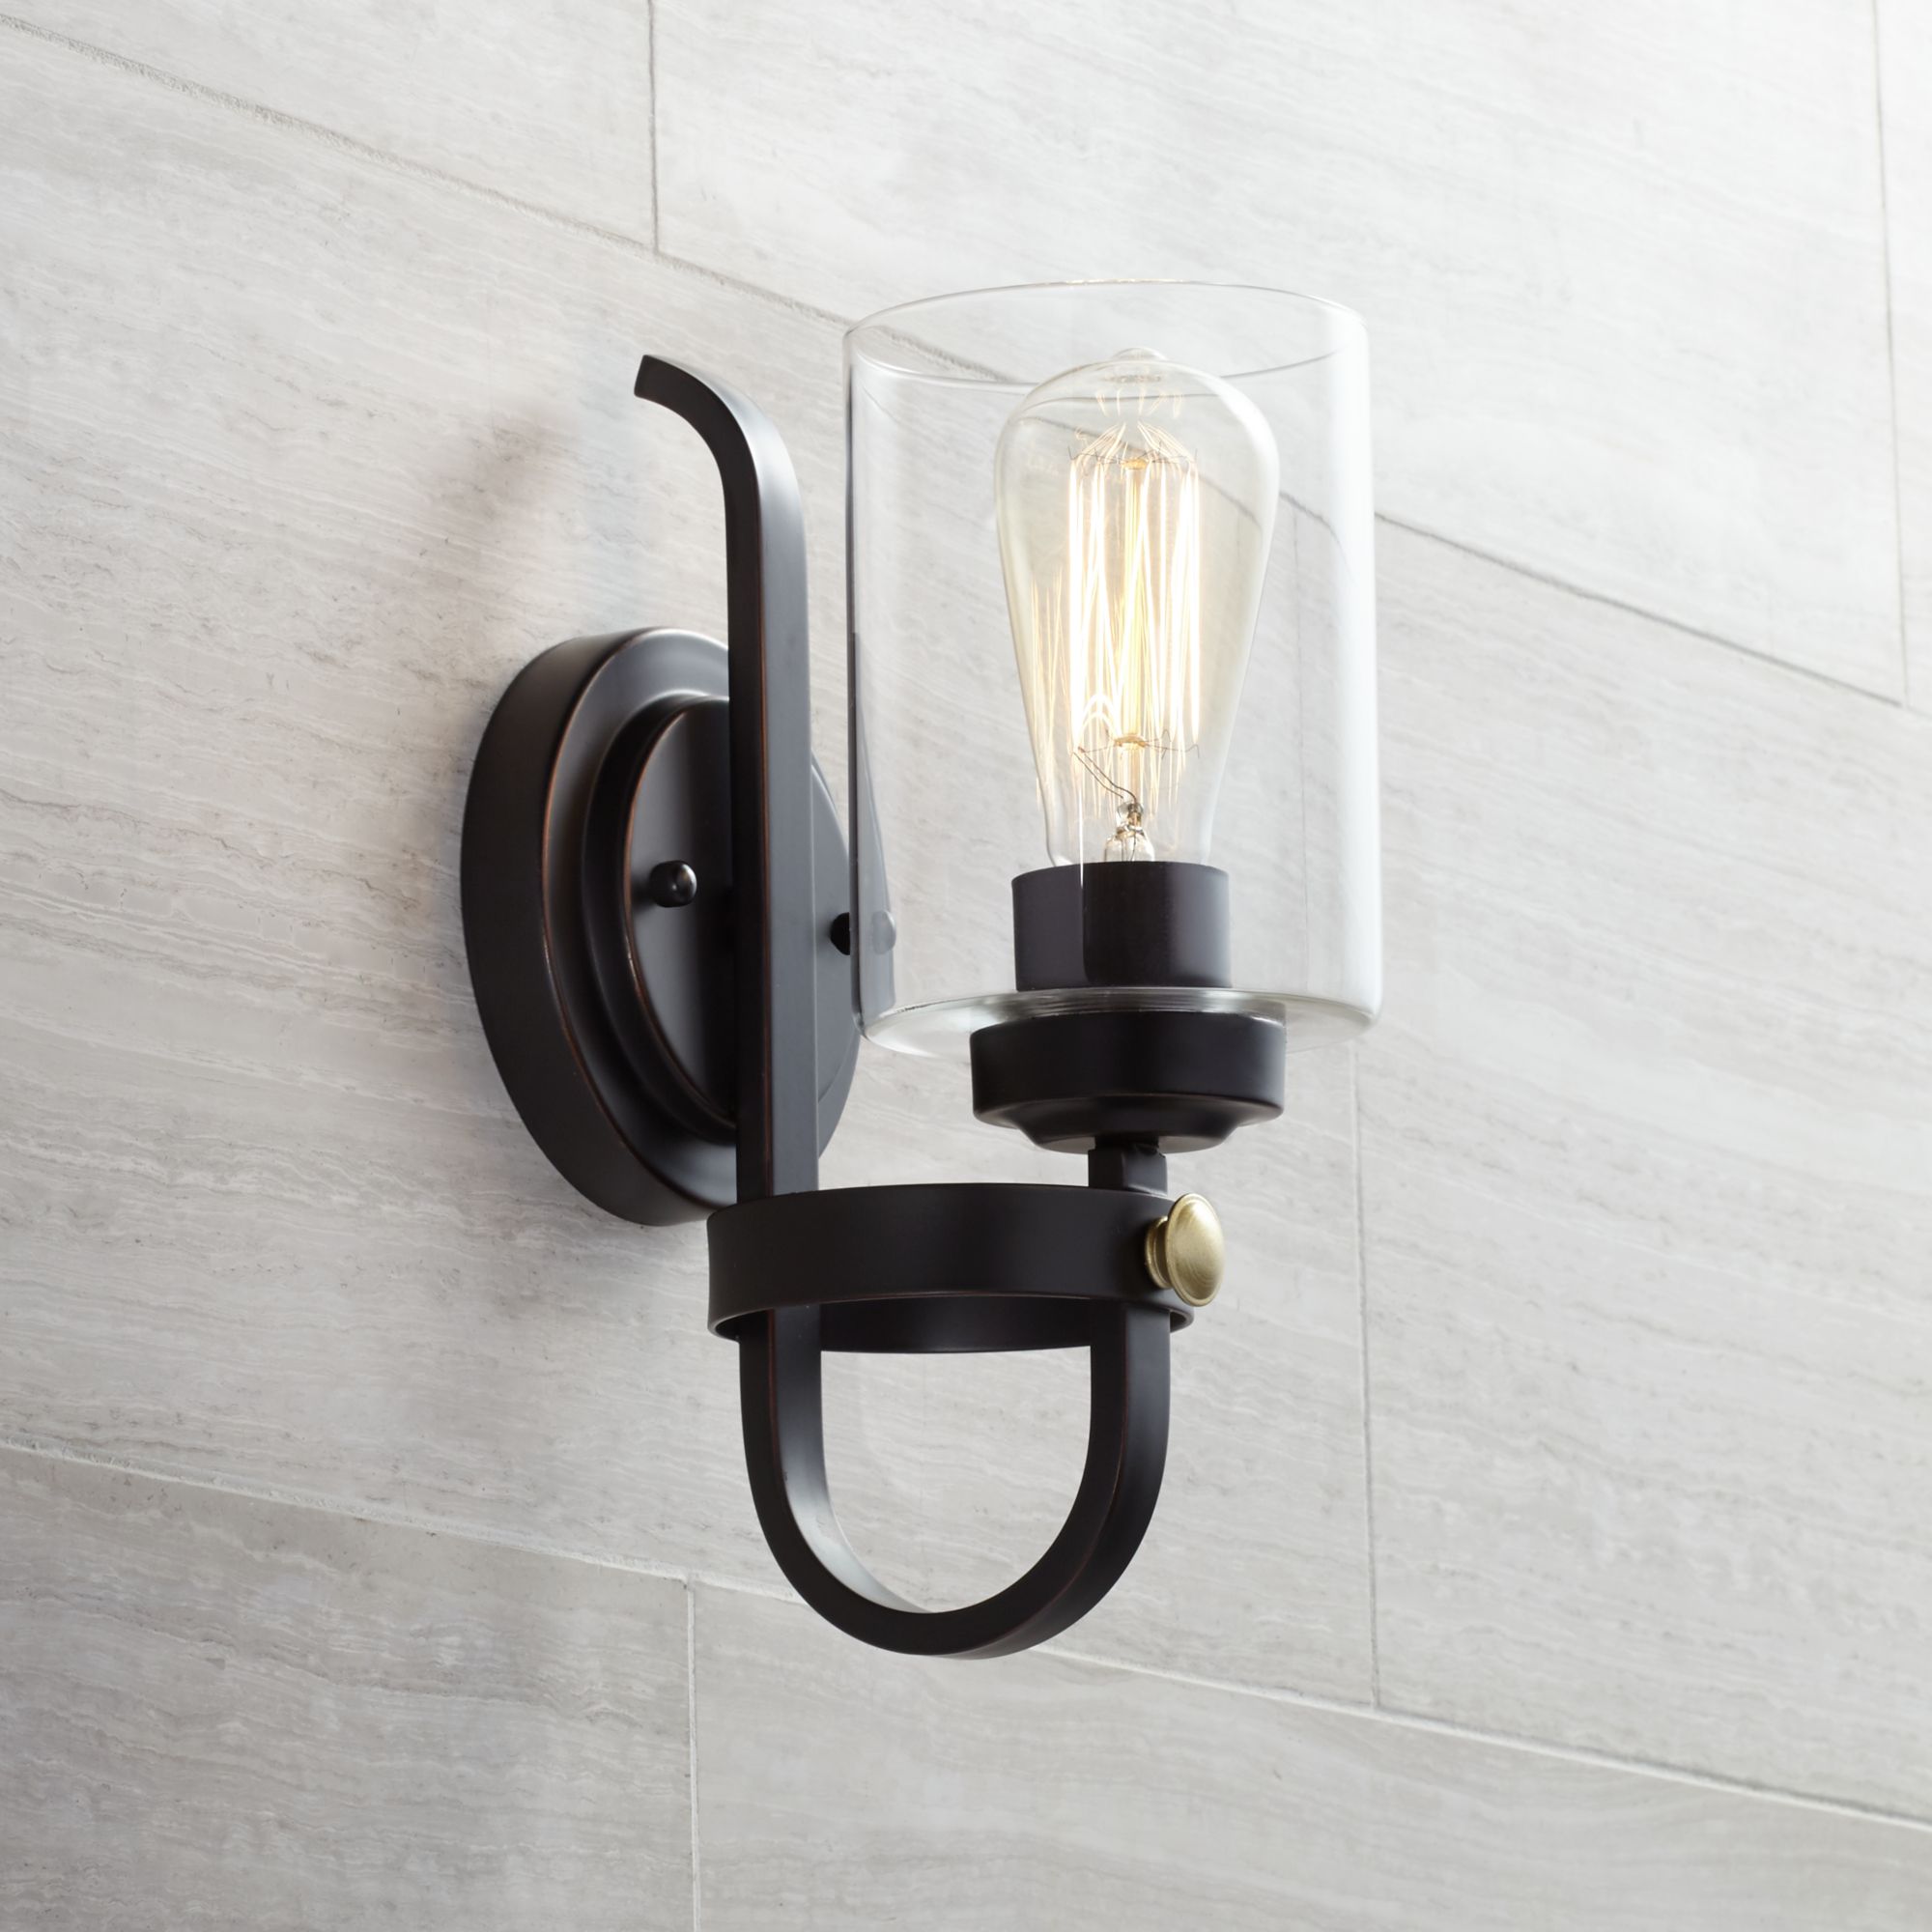 contemporary sconce lighting fixtures